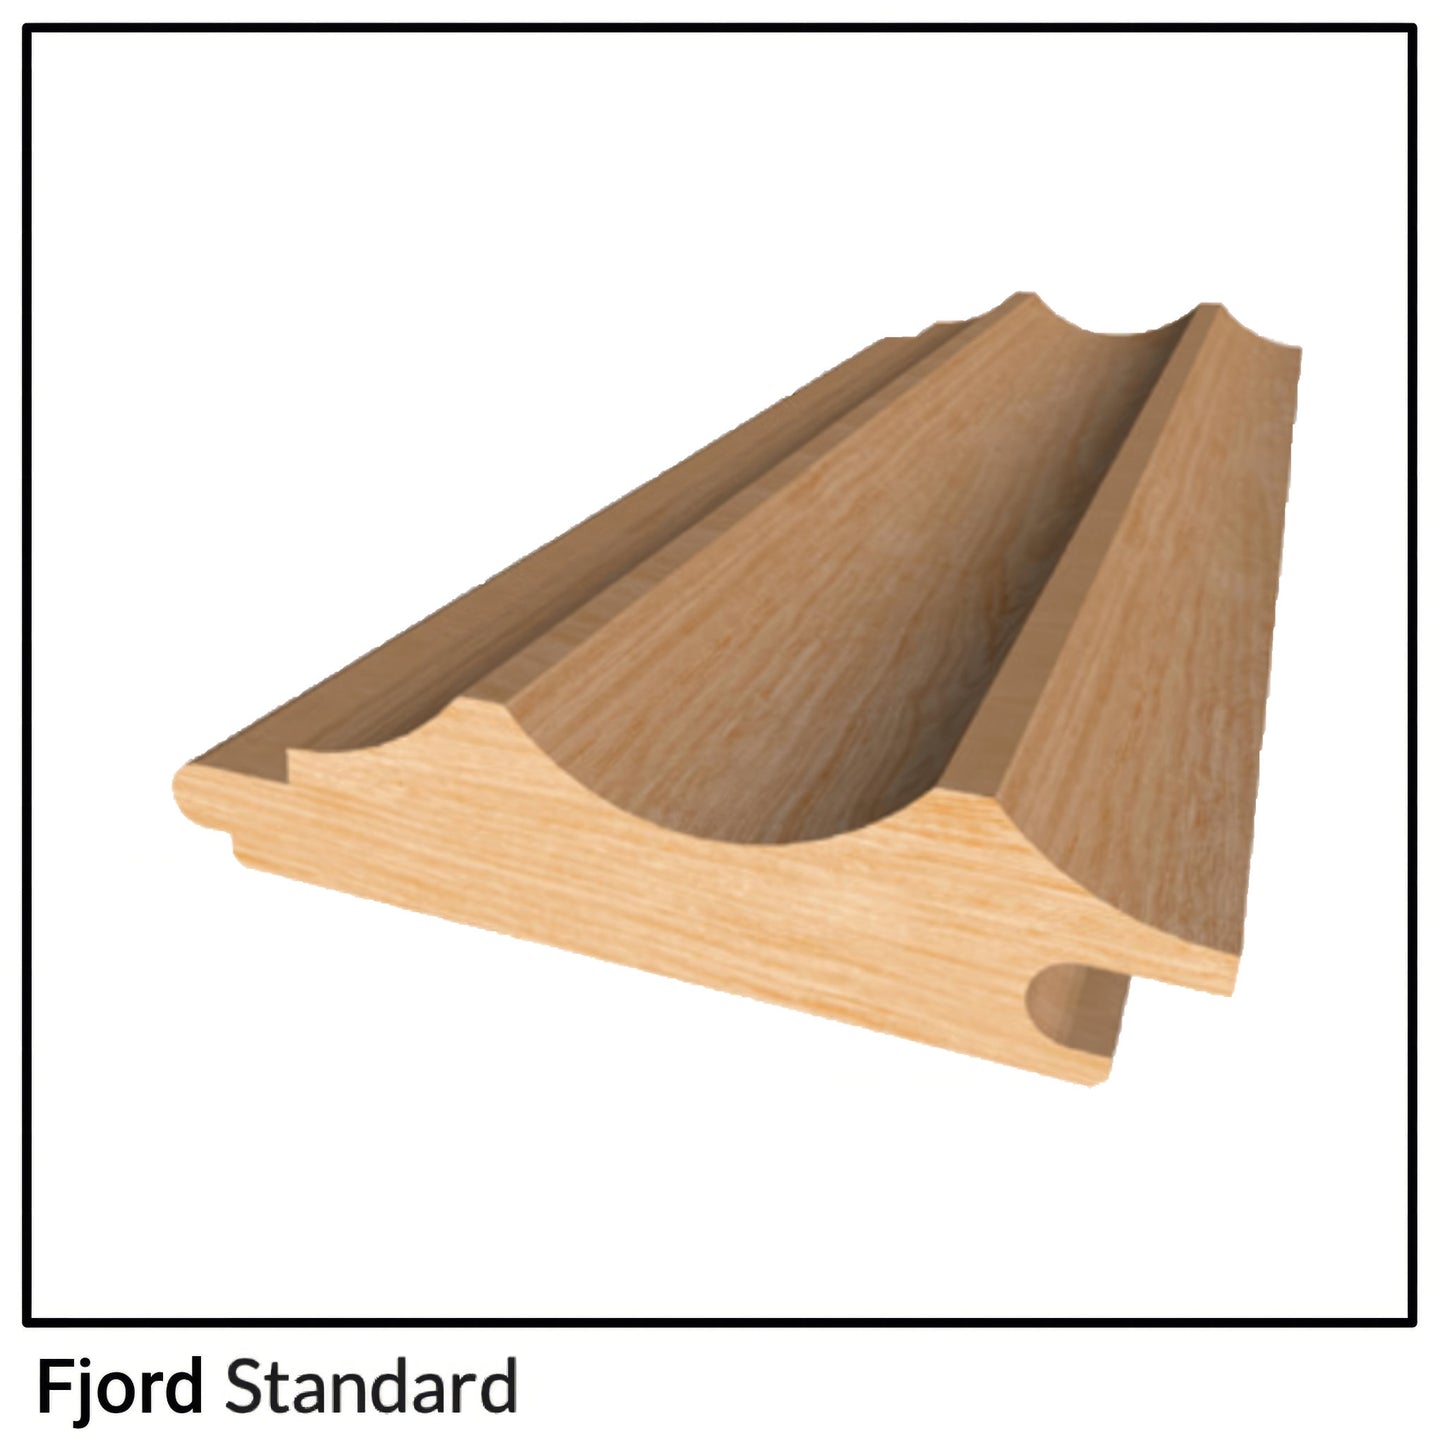 Solid wood moldings - Profile collection